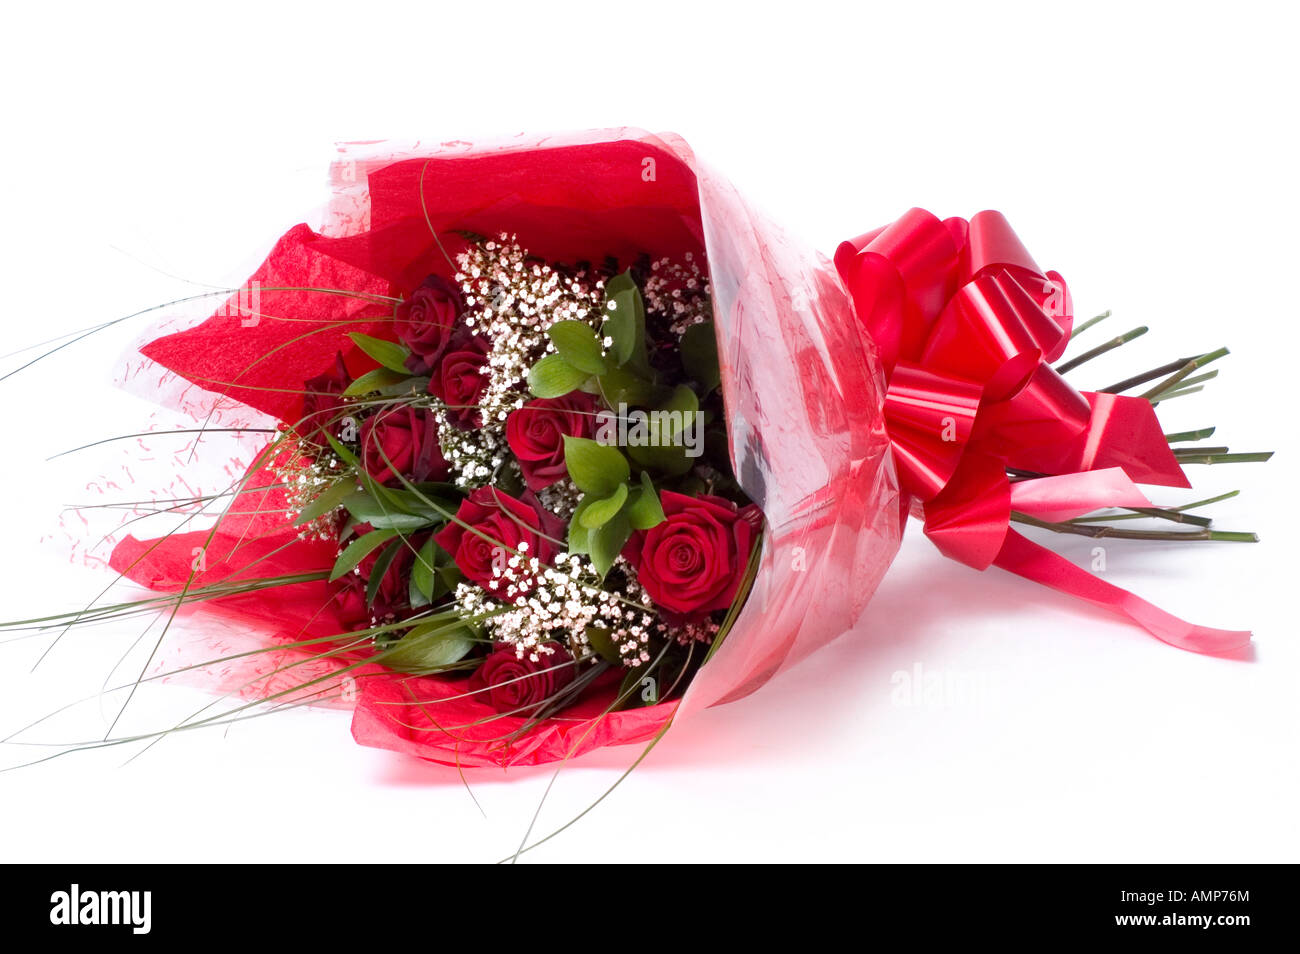 Bouquet of red roses, white angels hair and ferns wrapped in red paper with red ribbon Stock Photo